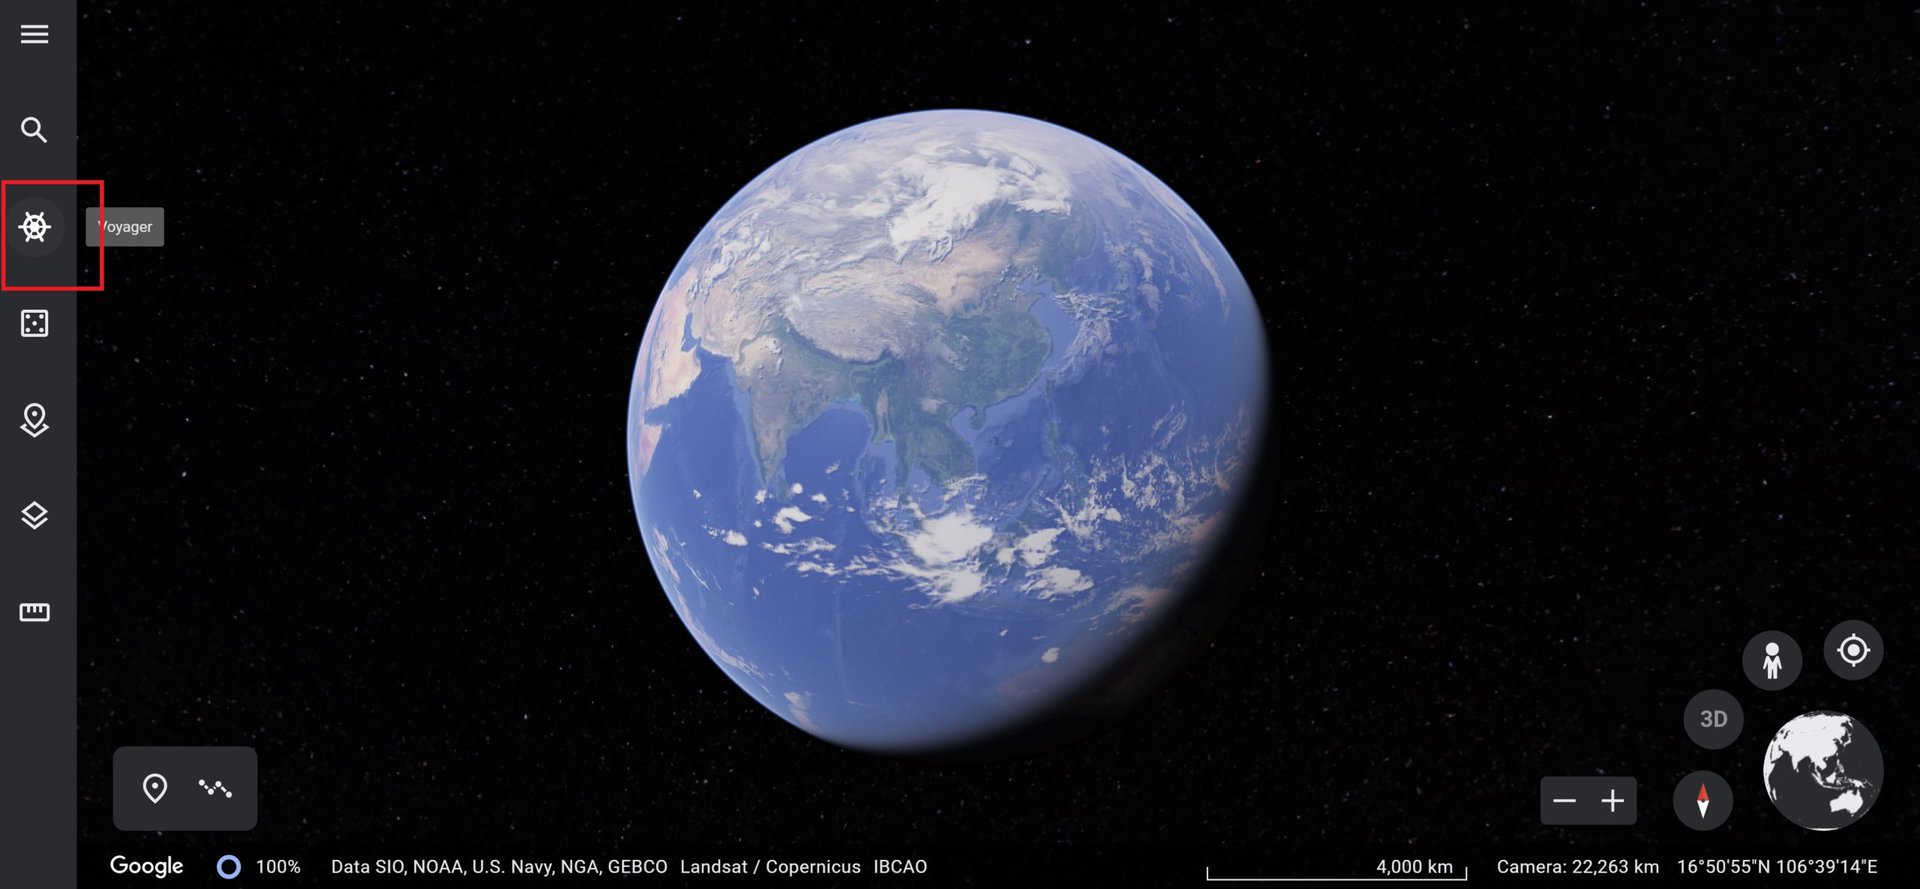 How to go back in on Google Earth - Android Authority